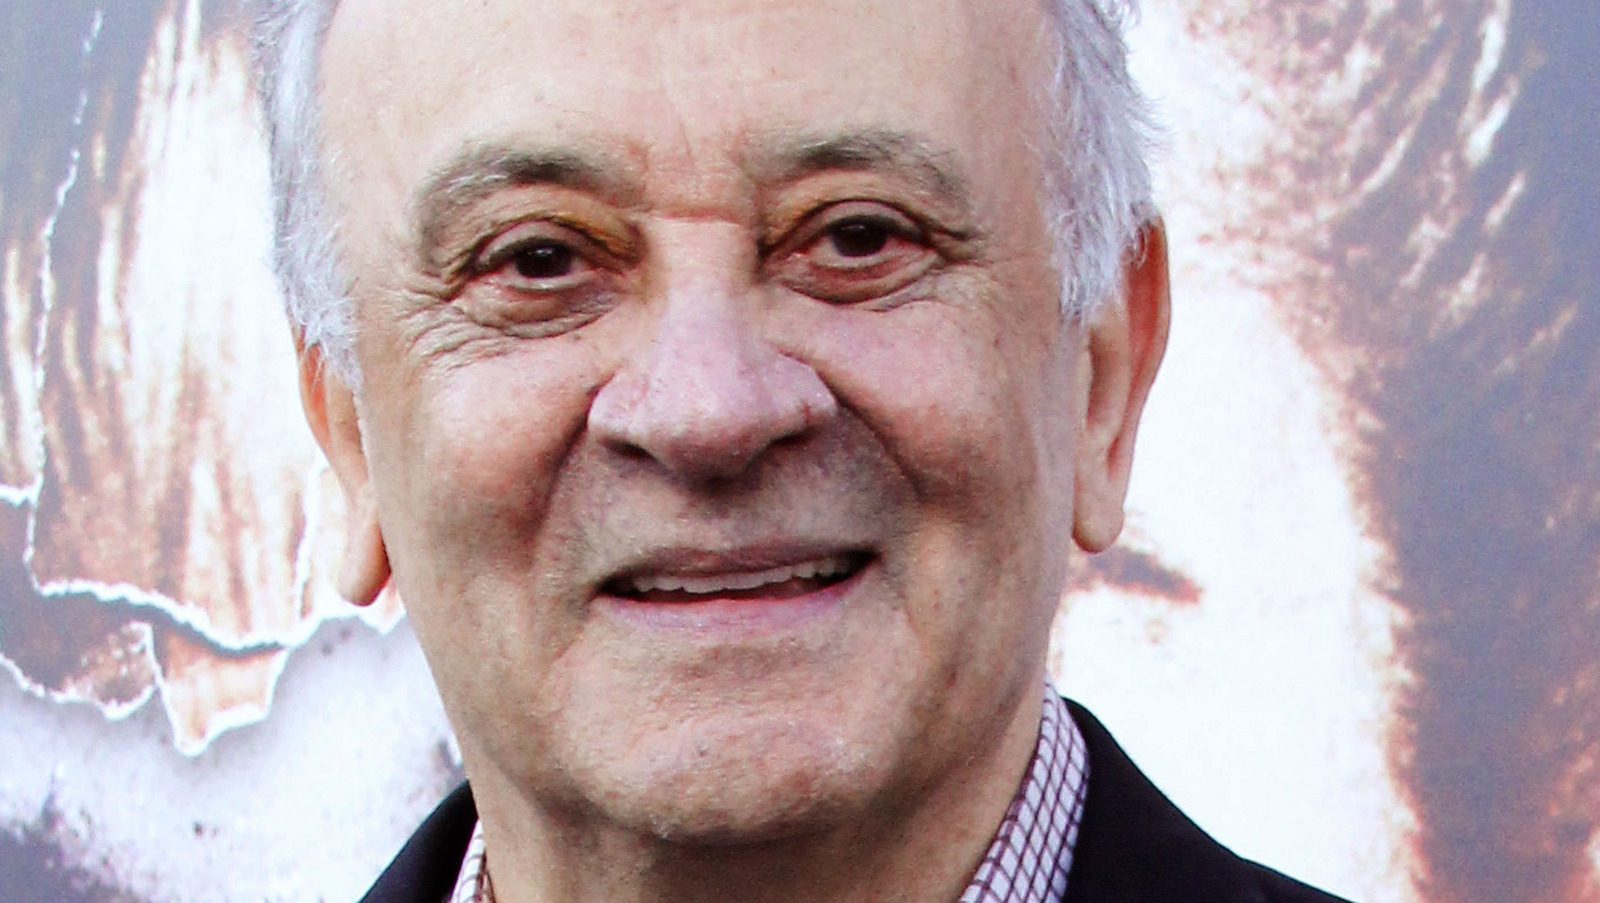 The Only Two Times Angelo Badalamenti Actually Appeared Onscreen In Lynch's Movies